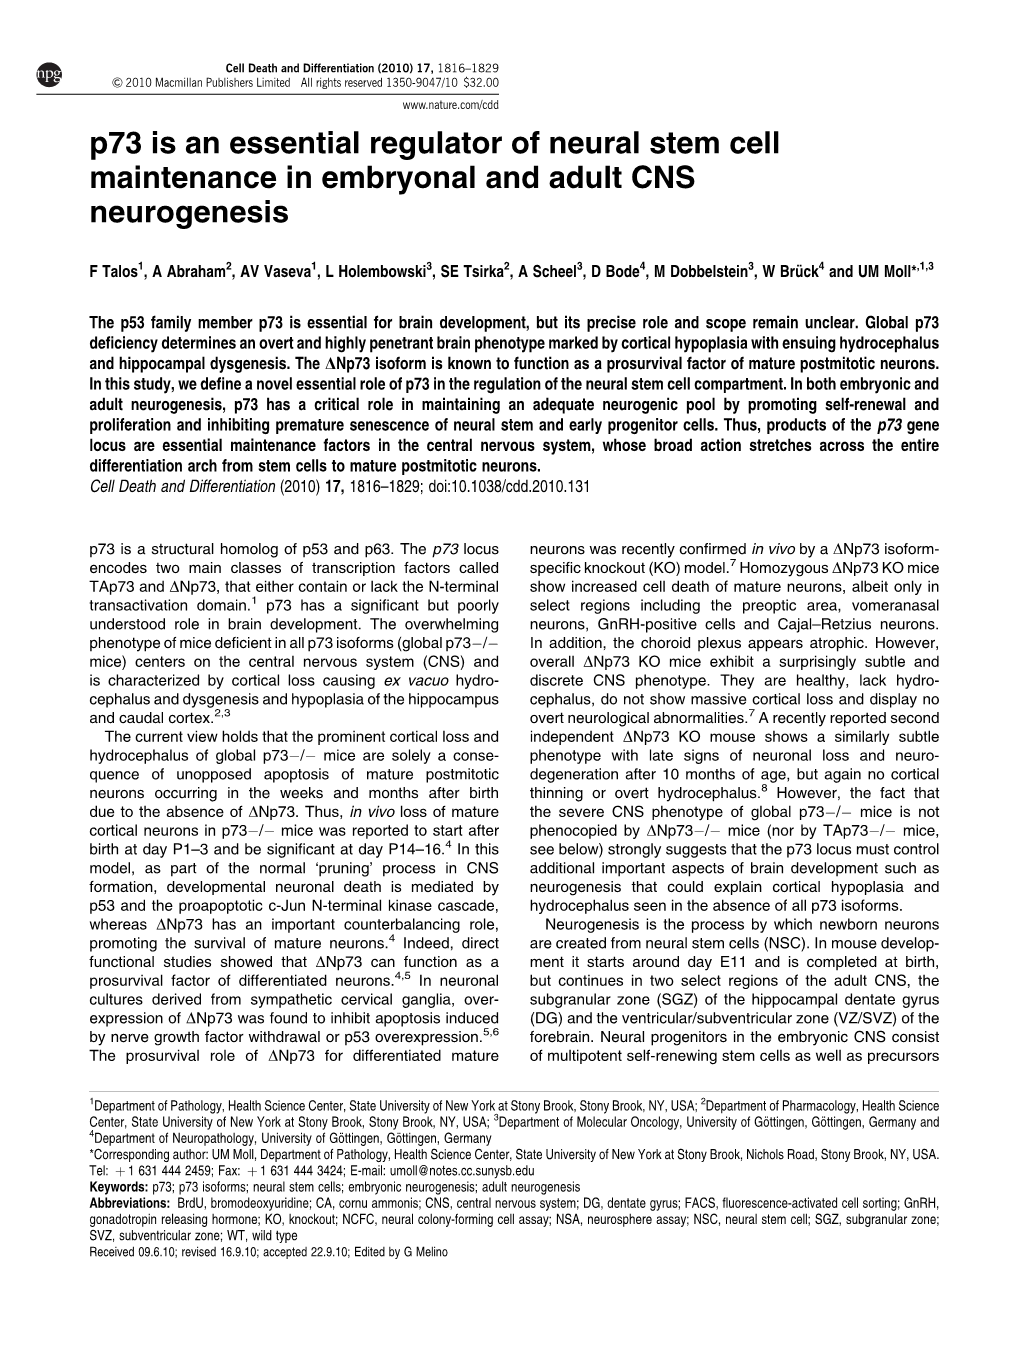 P73 Is an Essential Regulator of Neural Stem Cell Maintenance in Embryonal and Adult CNS Neurogenesis